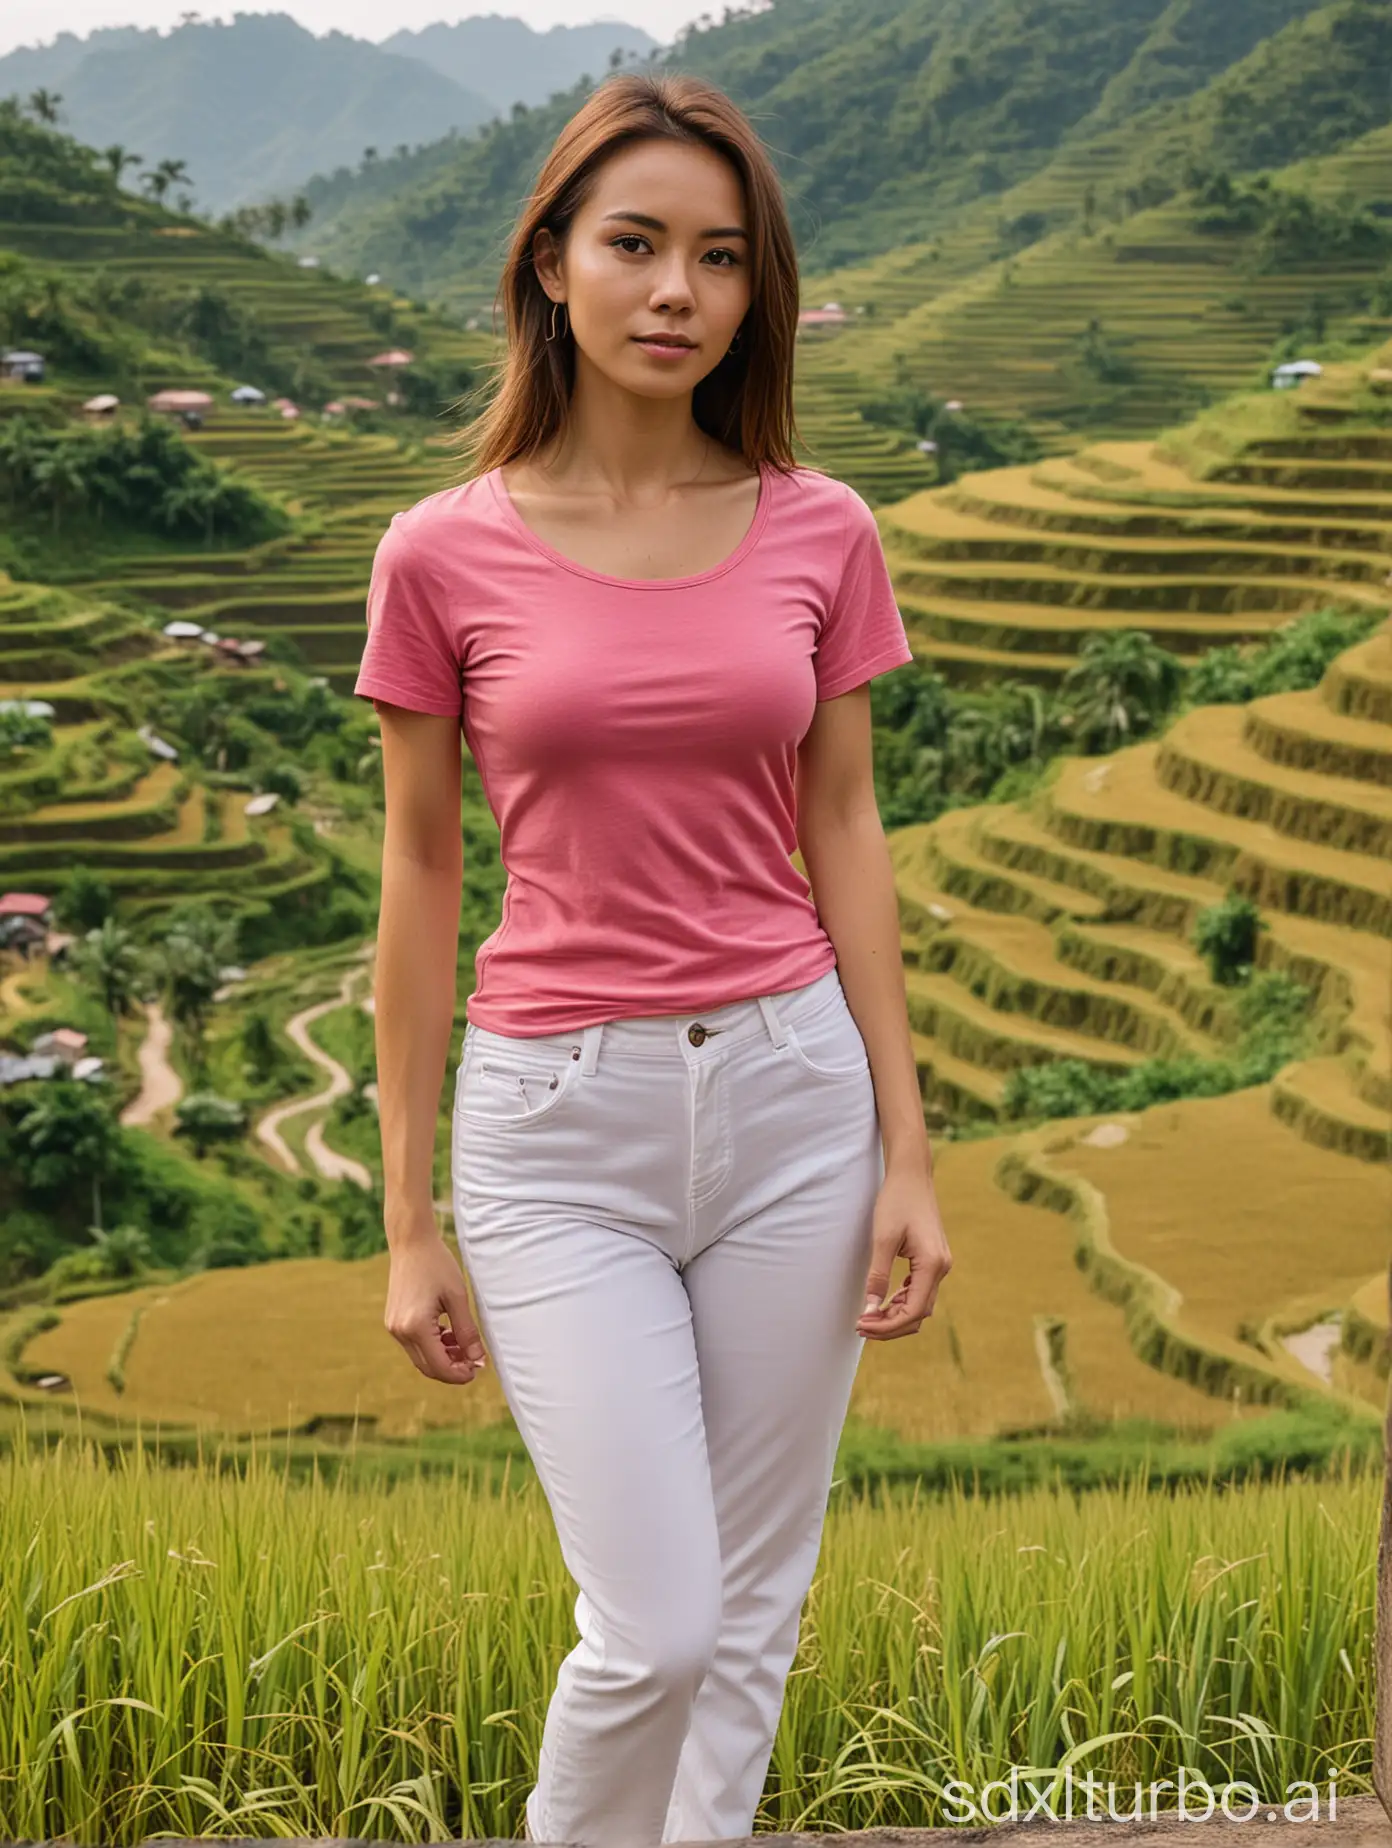 woman, medium brown hair, slim body, small breast, wearing tight dark pink t-shirt, wearing white long pants, standing on higher ground, background below far is terraced rice field